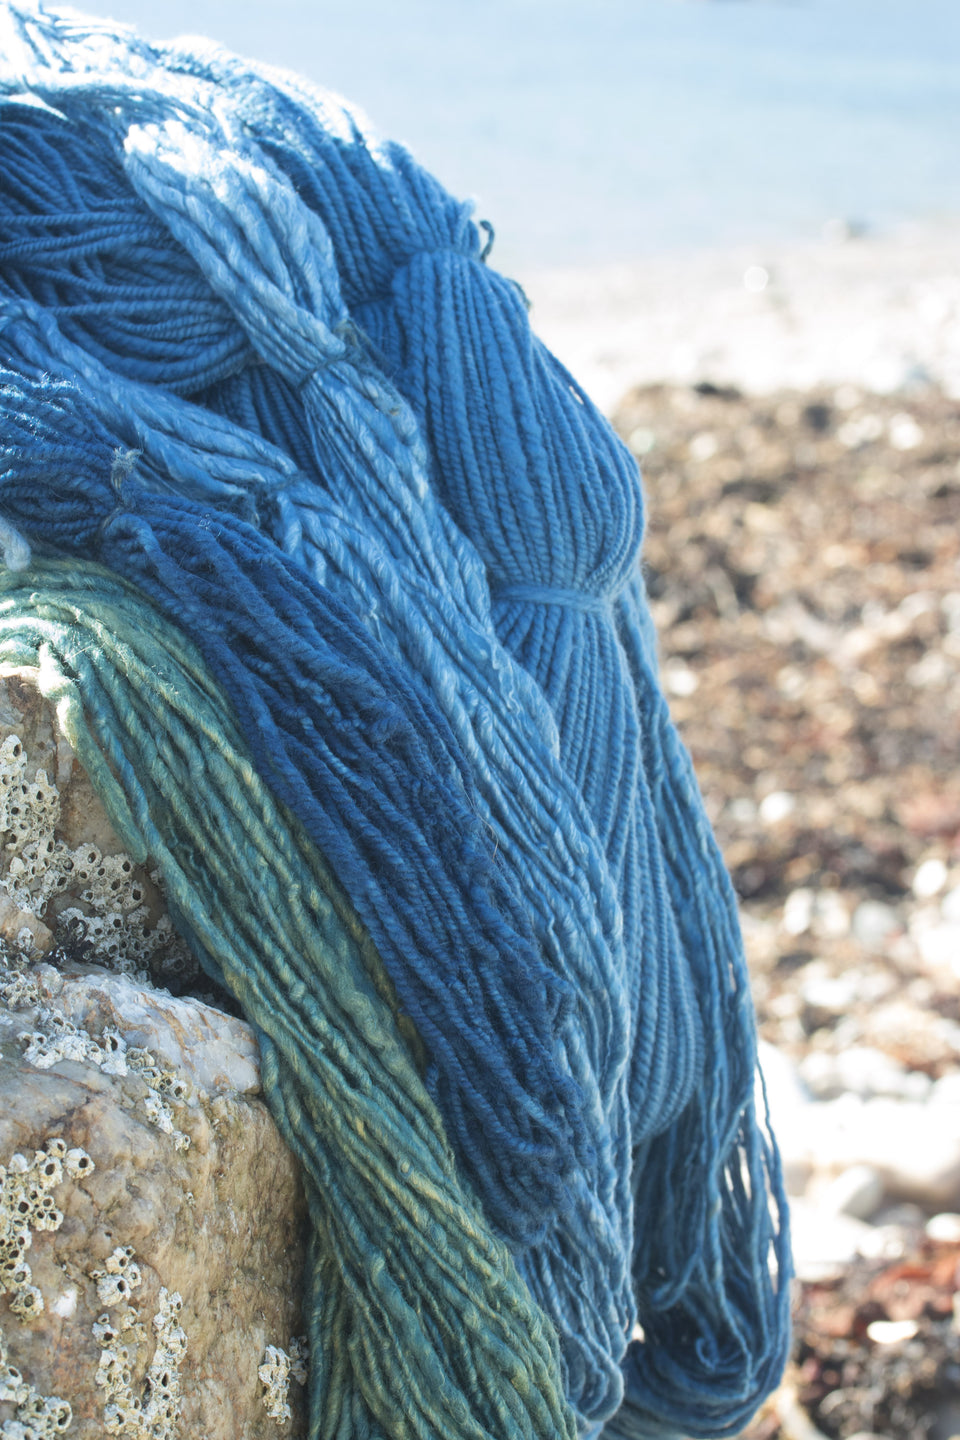 group of indigo-dyed hand-spun yarn on the shore at Hoswick, Shetland. Sea in the background